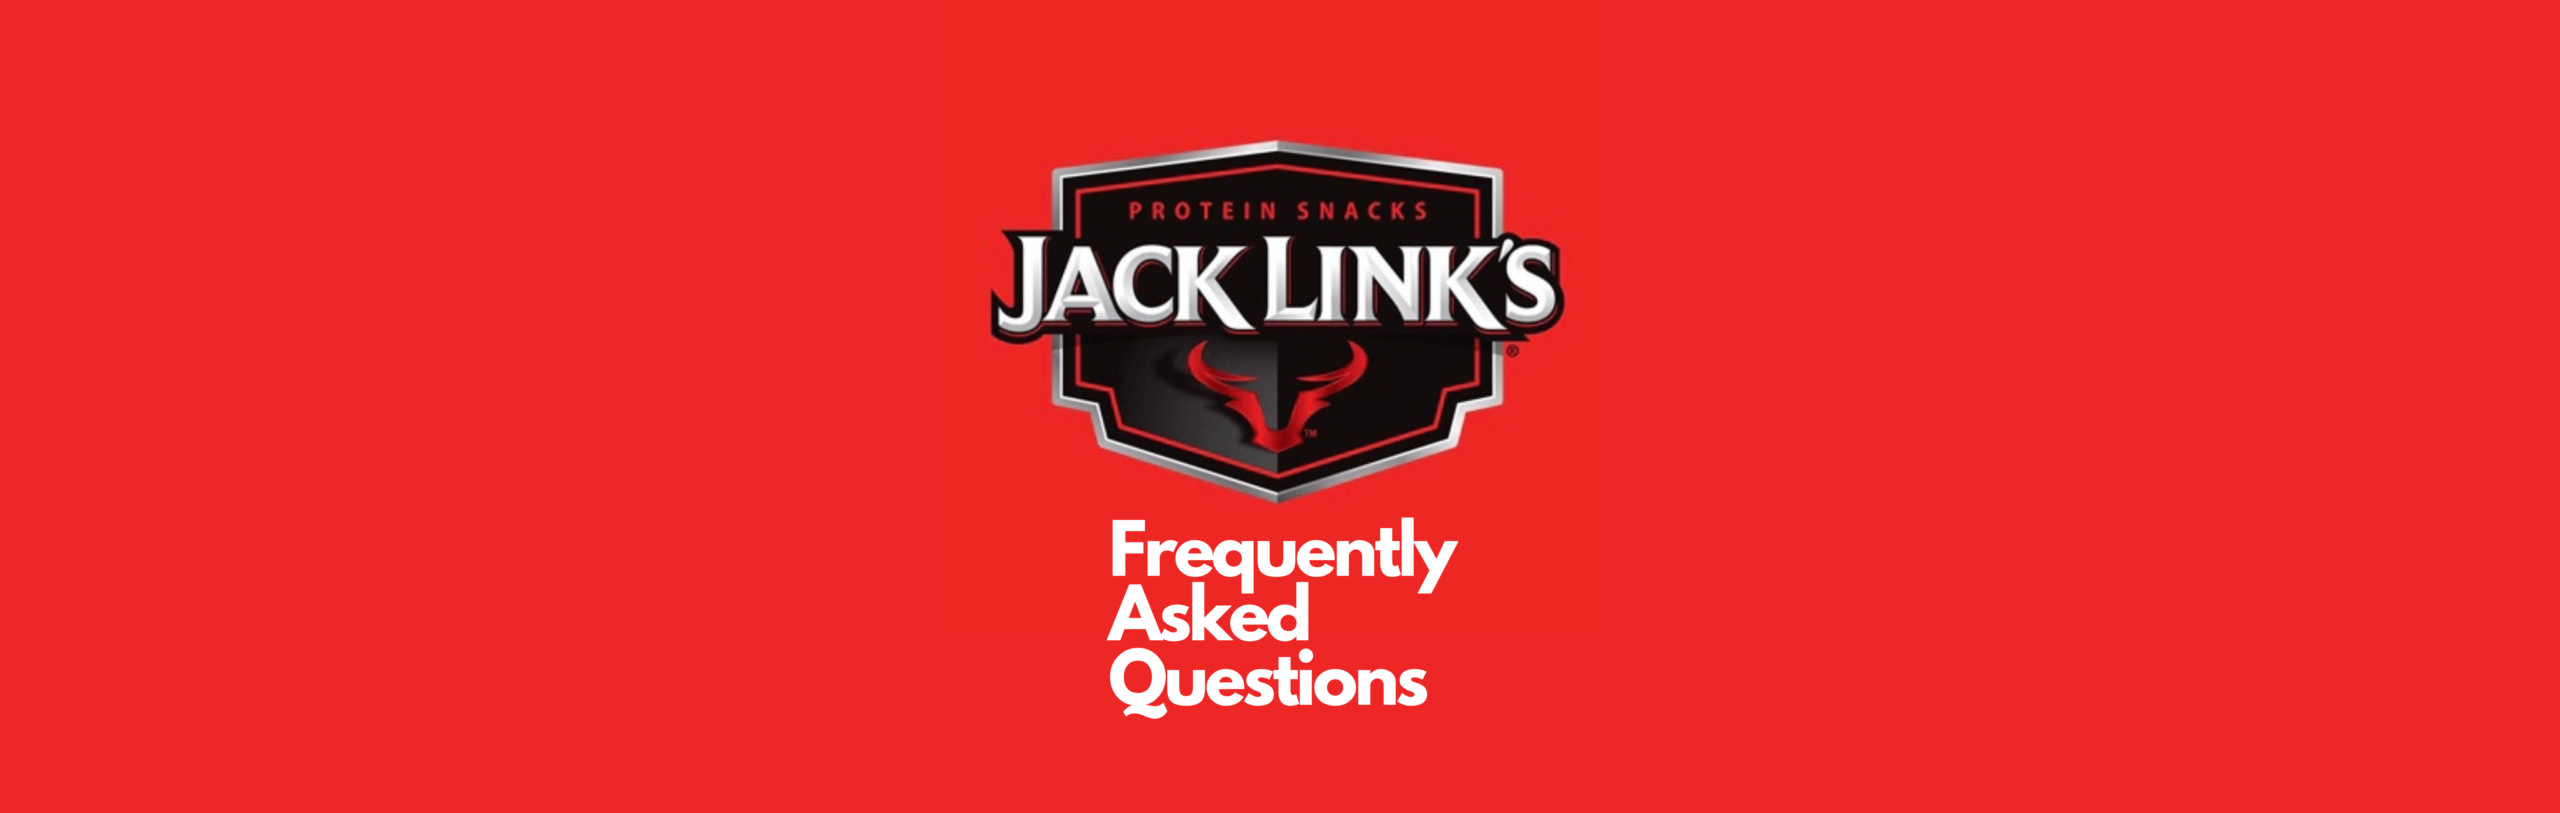 Jack Link's Jerky Frequently asked Questions